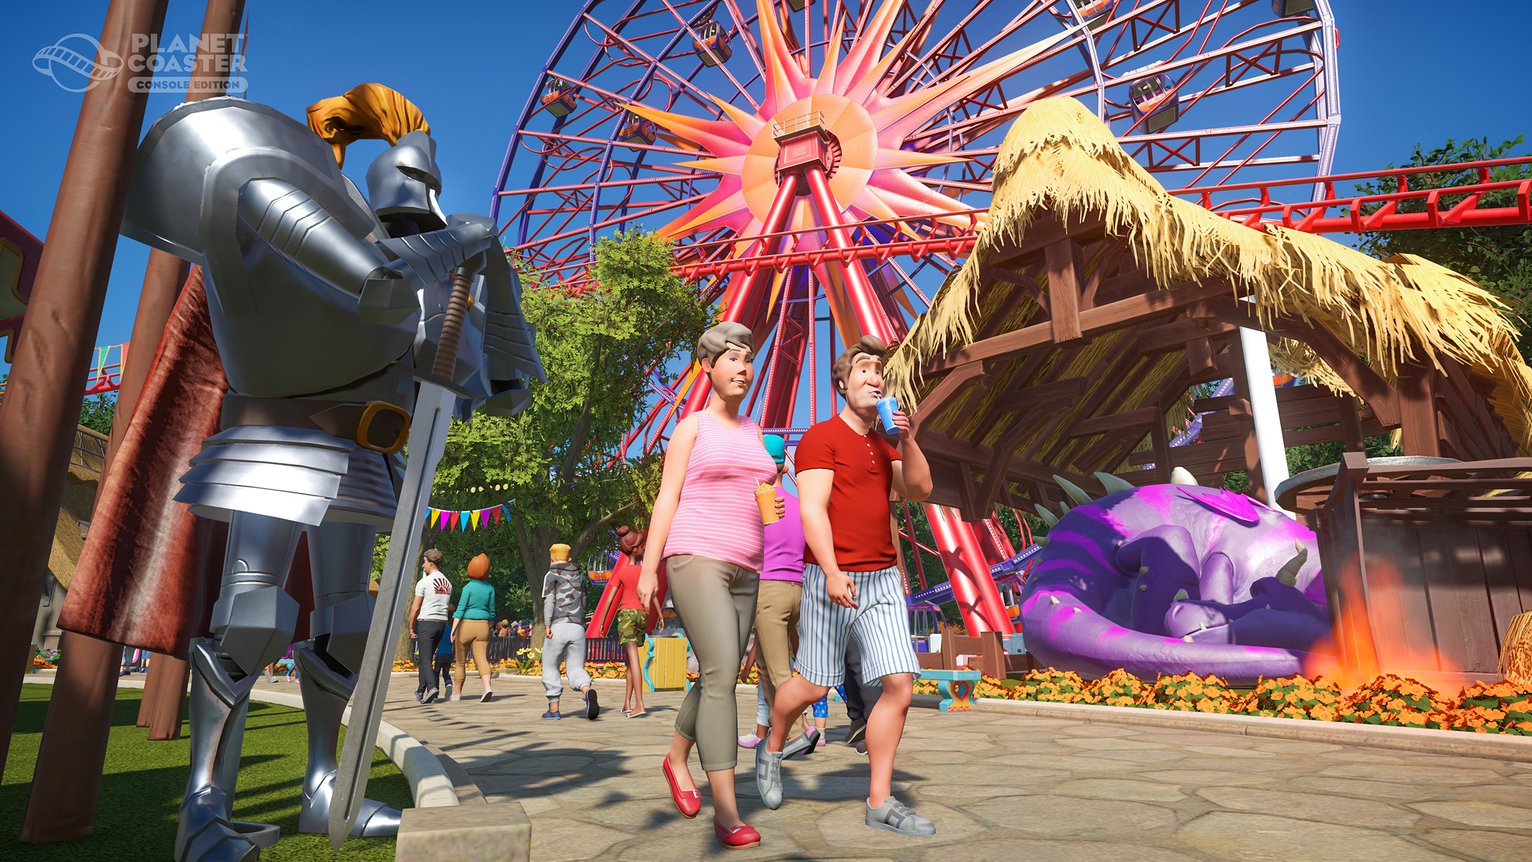 Planet Coaster Xbox One Game Pre-Order Review